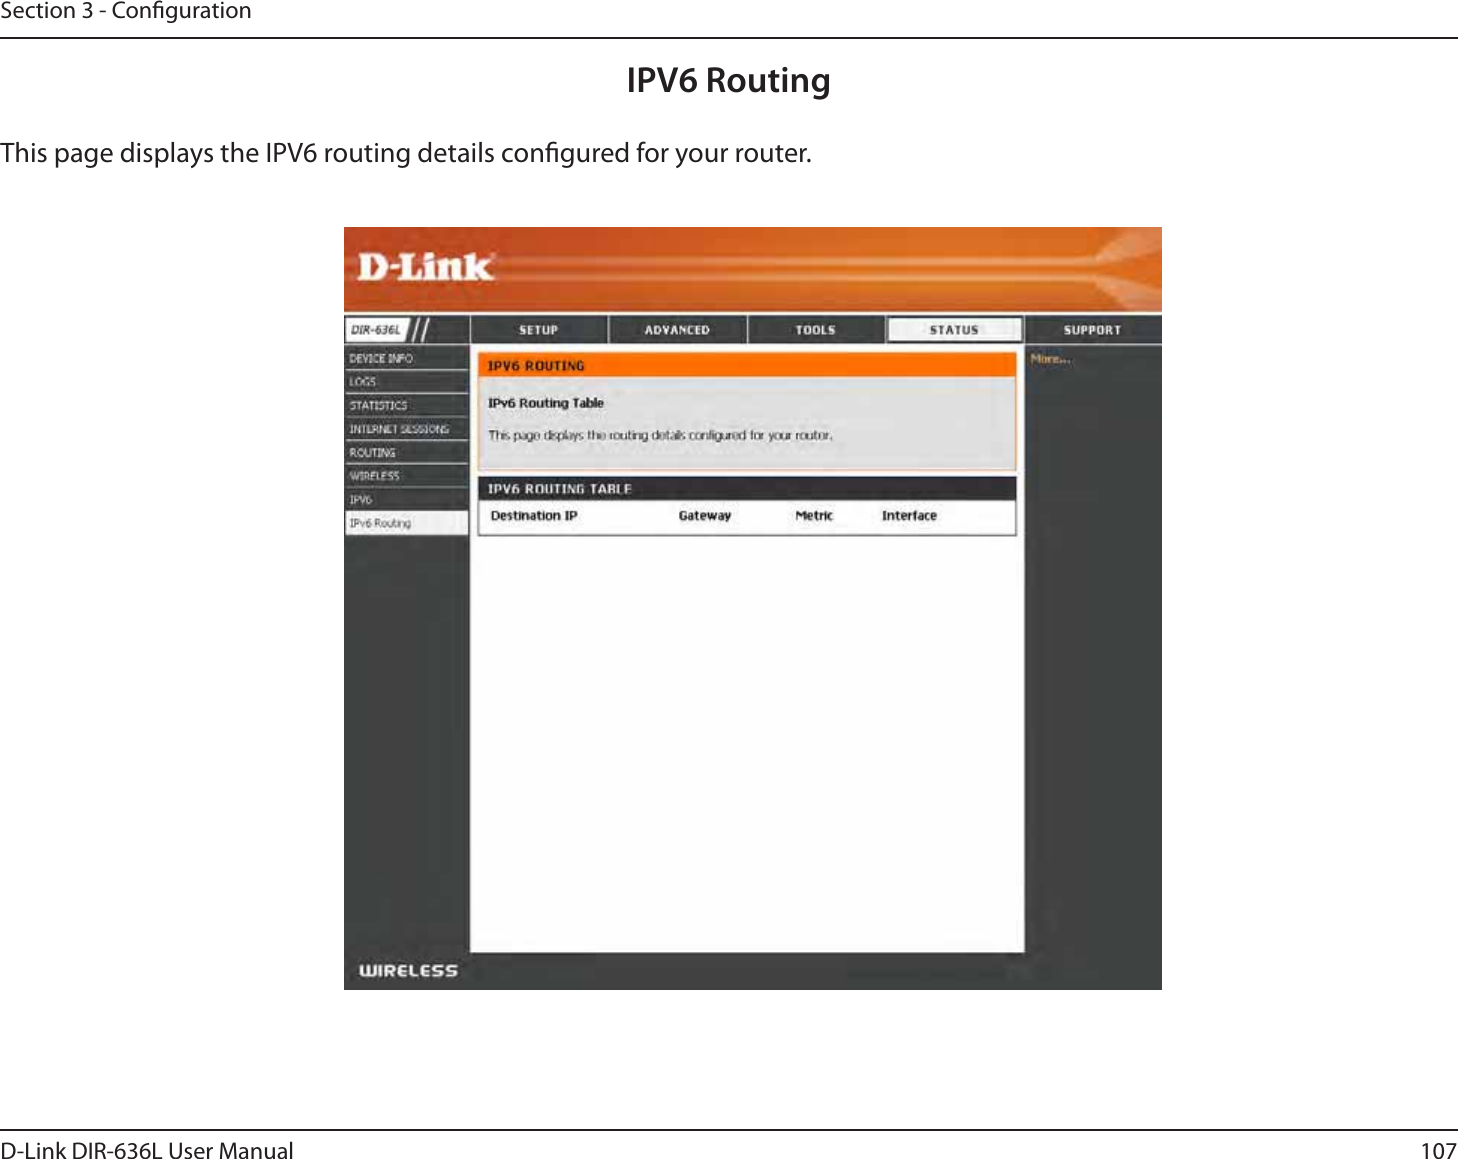 107D-Link DIR-636L User ManualSection 3 - CongurationIPV6 RoutingThis page displays the IPV6 routing details congured for your router. 